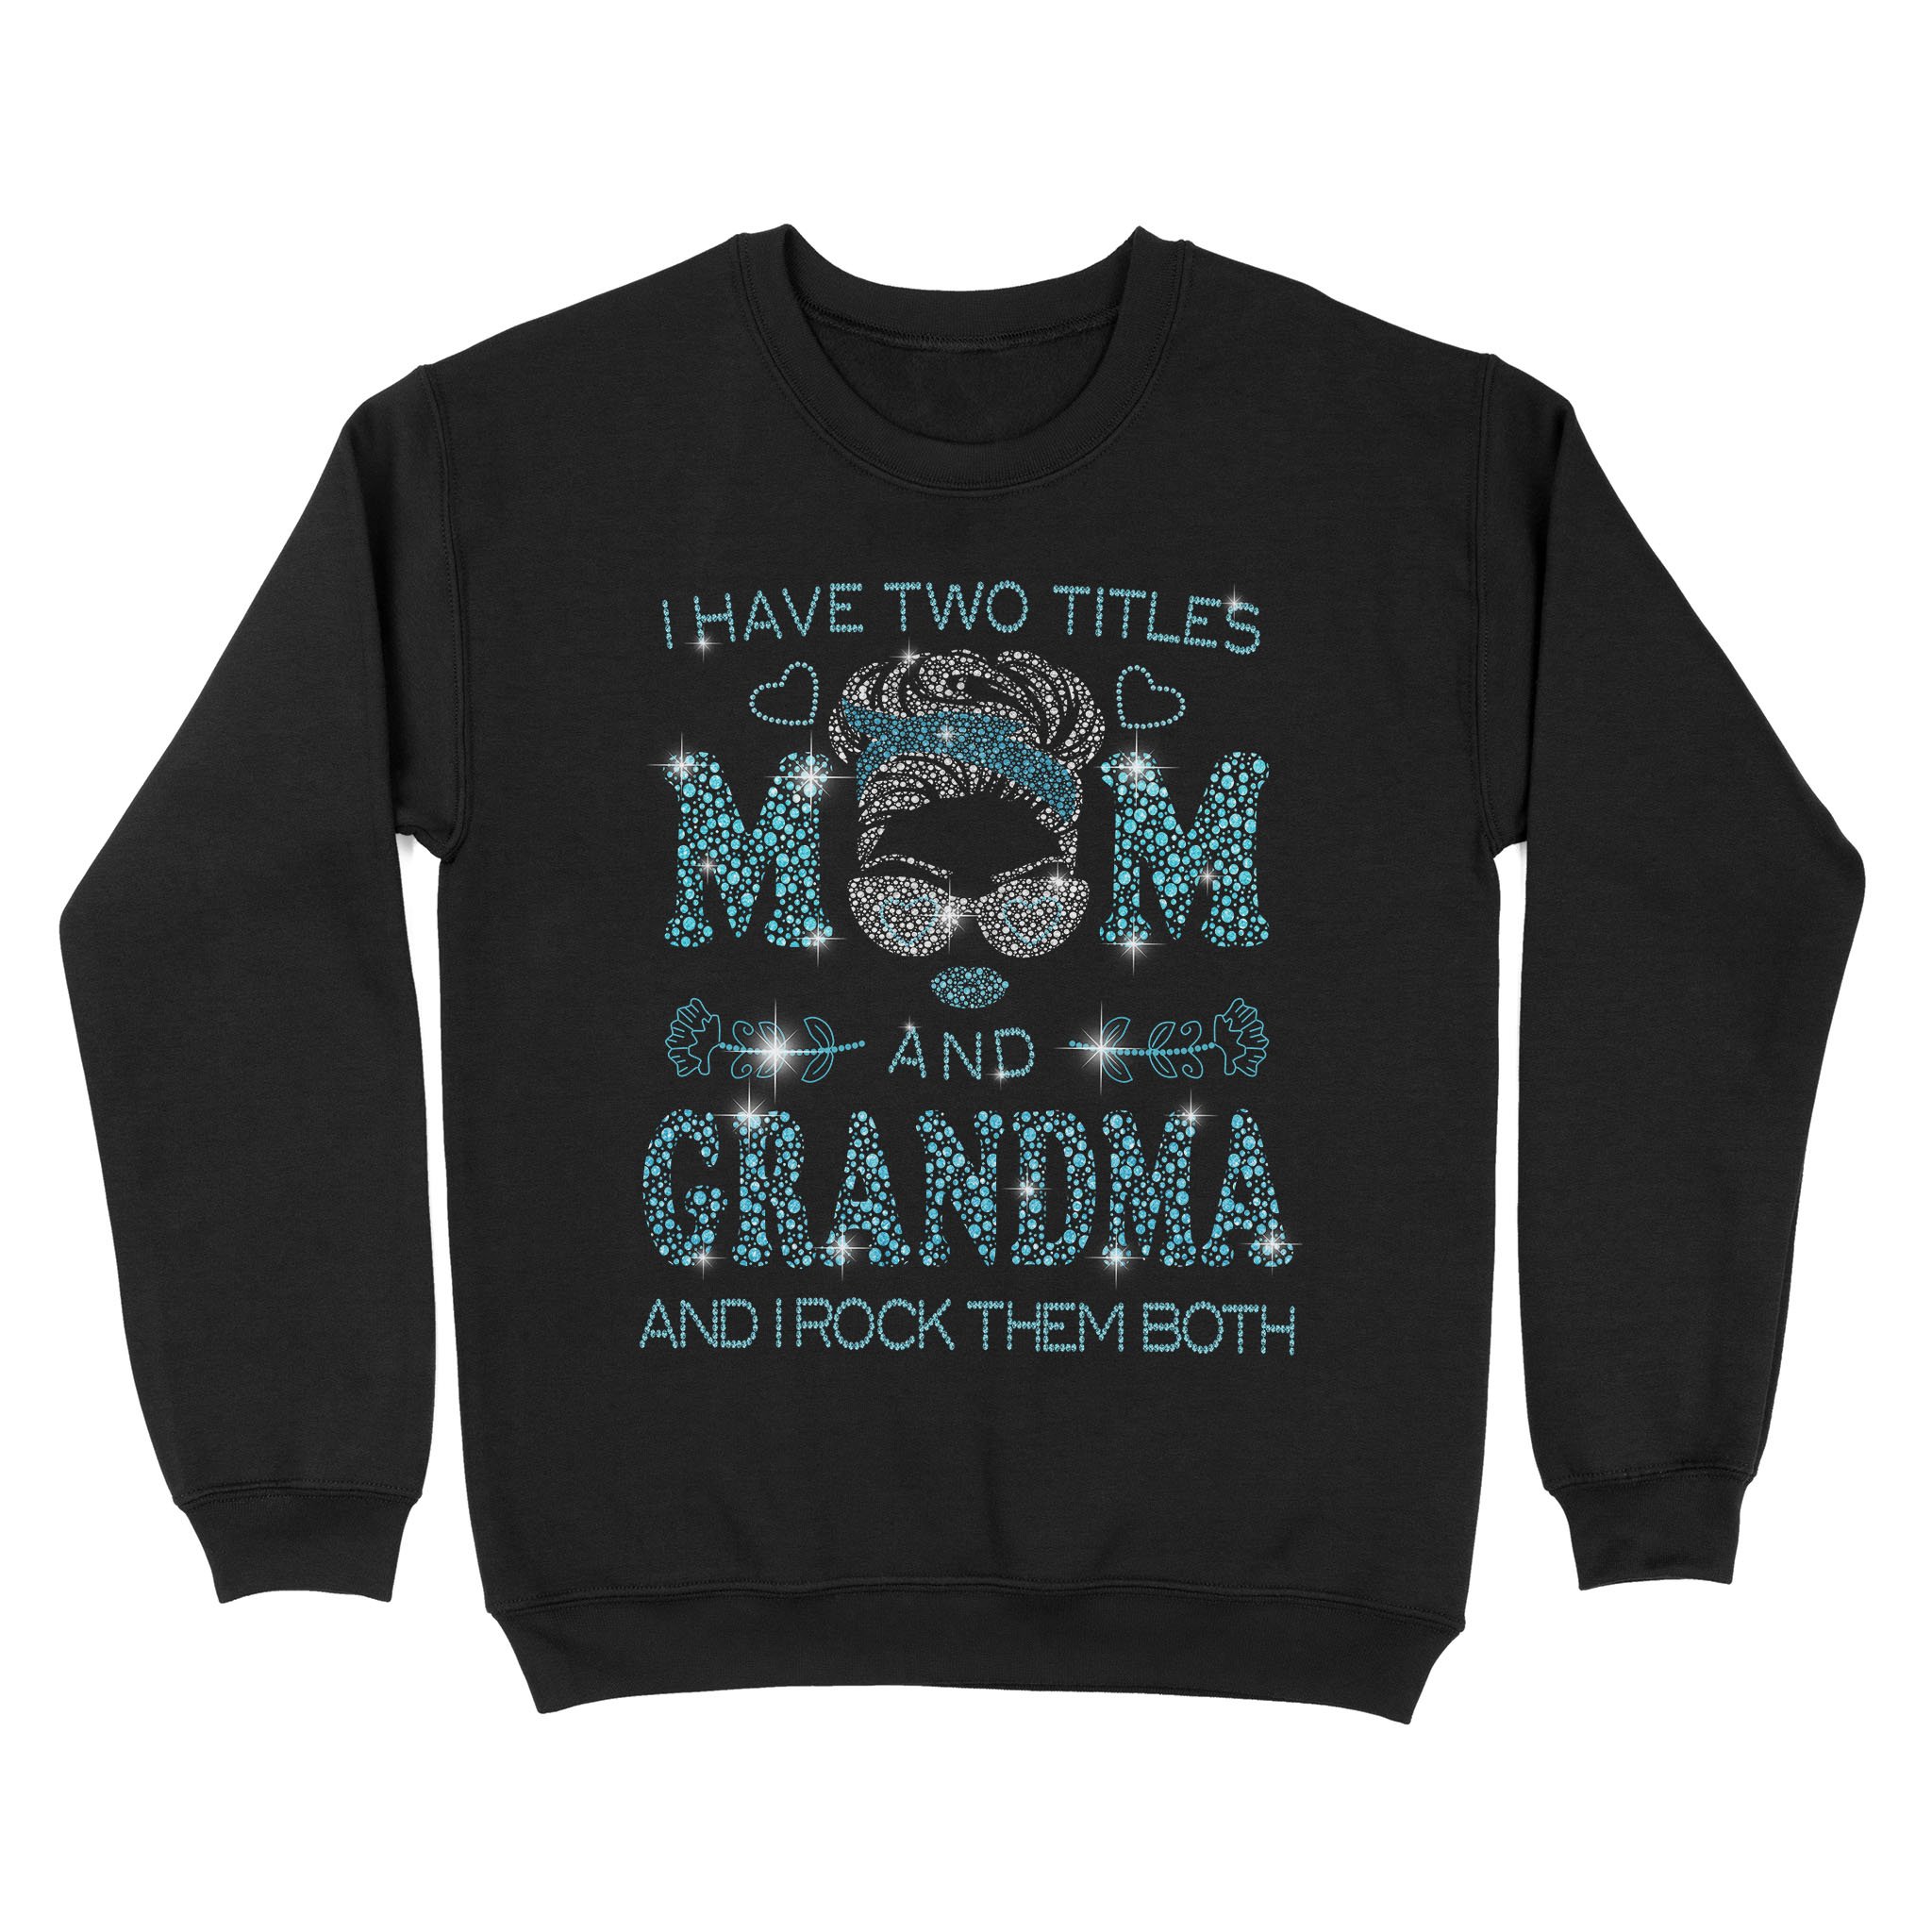 I Hate Two Titles Mom And Grandma And I Rock Them Both Funny Shirt Mother’s Day Gifts – Standard Crew Neck Sweatshirt